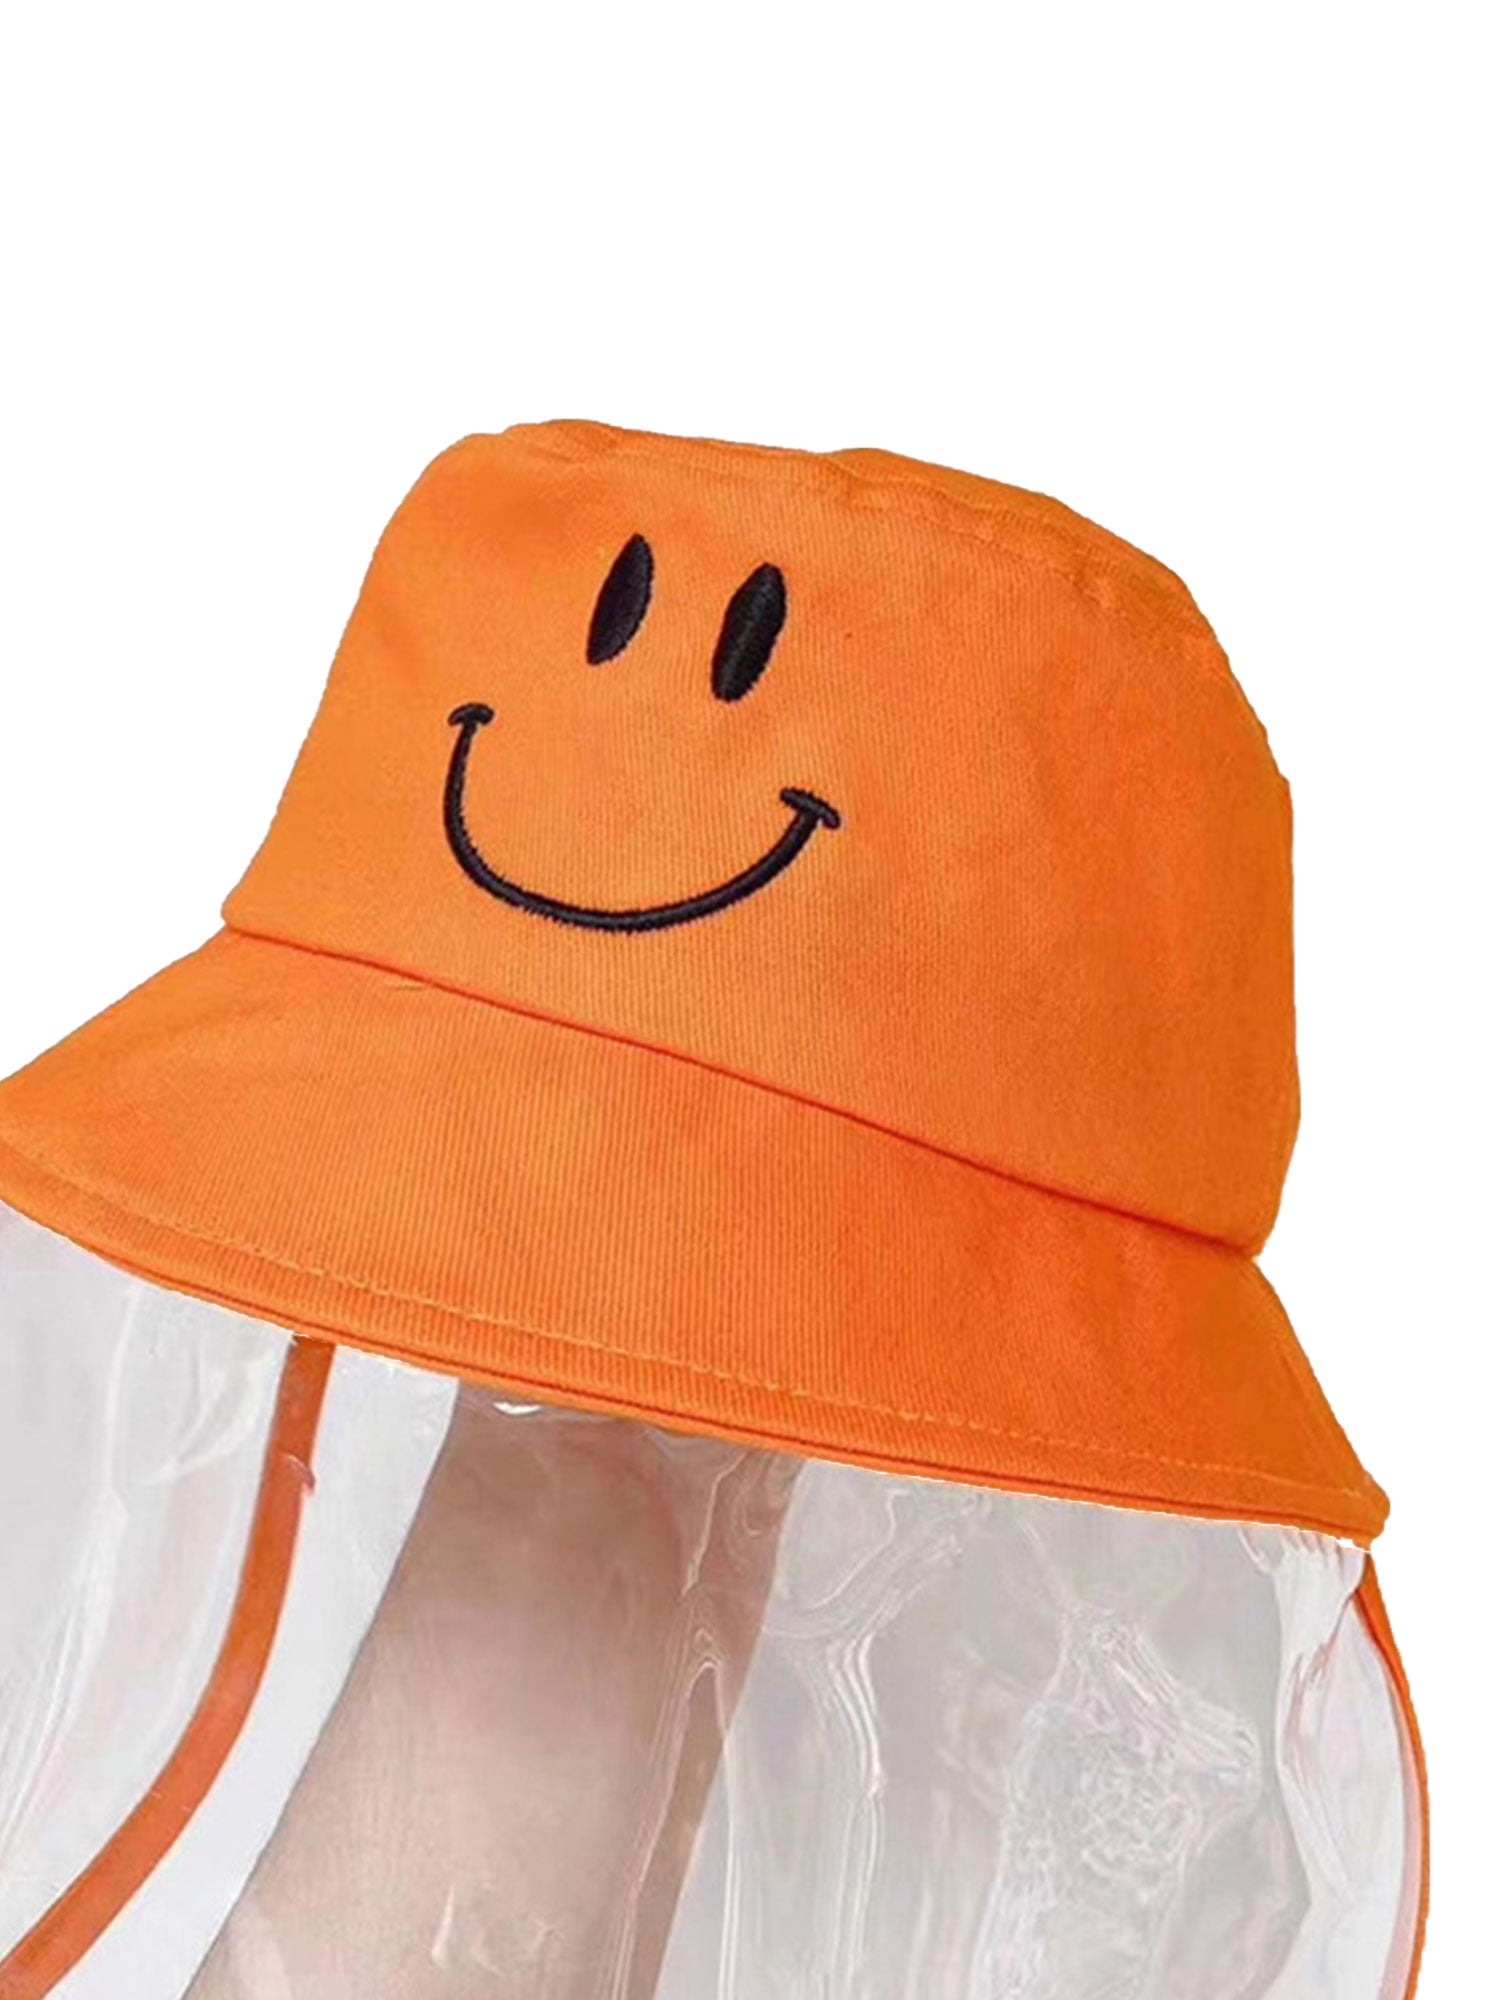 Dinokids Kids Protective Face Shield Cover Hat Face Shield Fisherman Hat Anti-Spitting Bucket Hat Large Brim Sun Protection Cap 